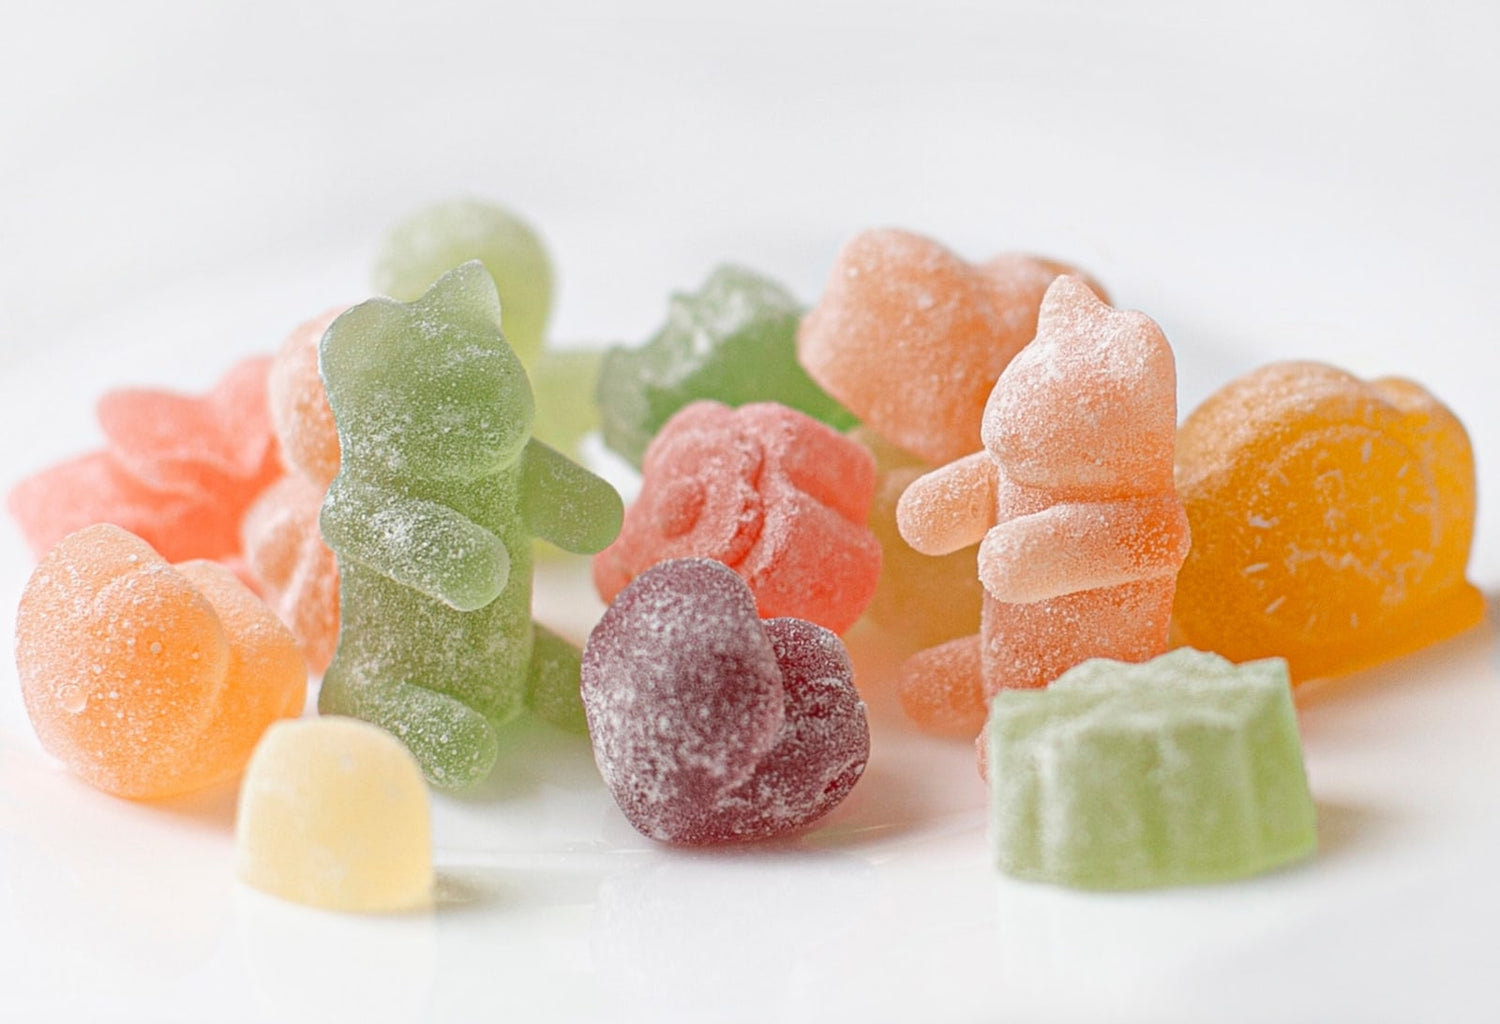 Image of your new favorite infused gummies made with LĒVO.